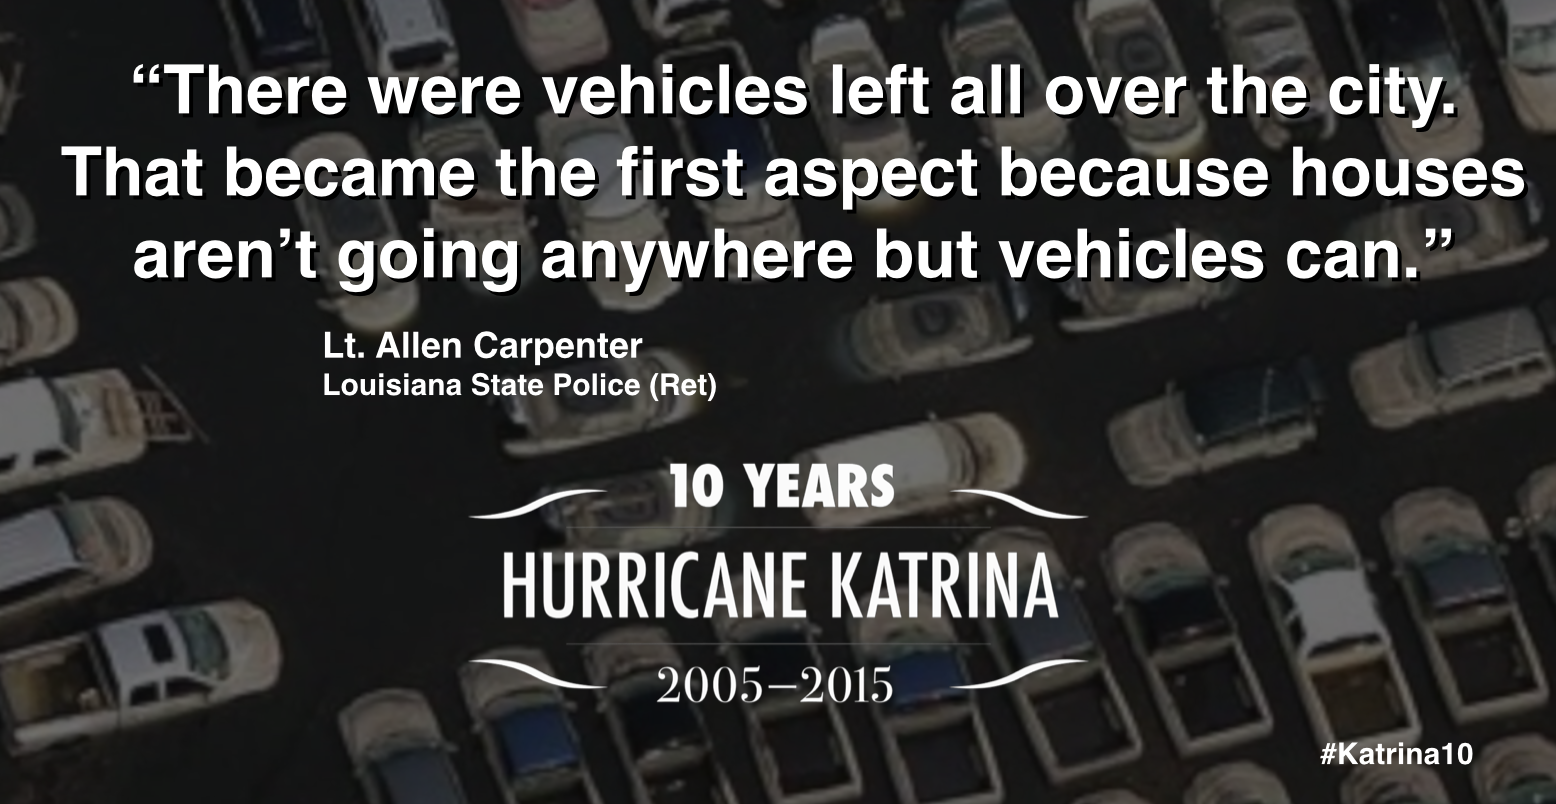 "There were vehicles left all over the city. That became the first aspect because houses aren't going anywhere but vehicles can." - Lt. Allen Carpenter, Louisiana State Police (Ret)